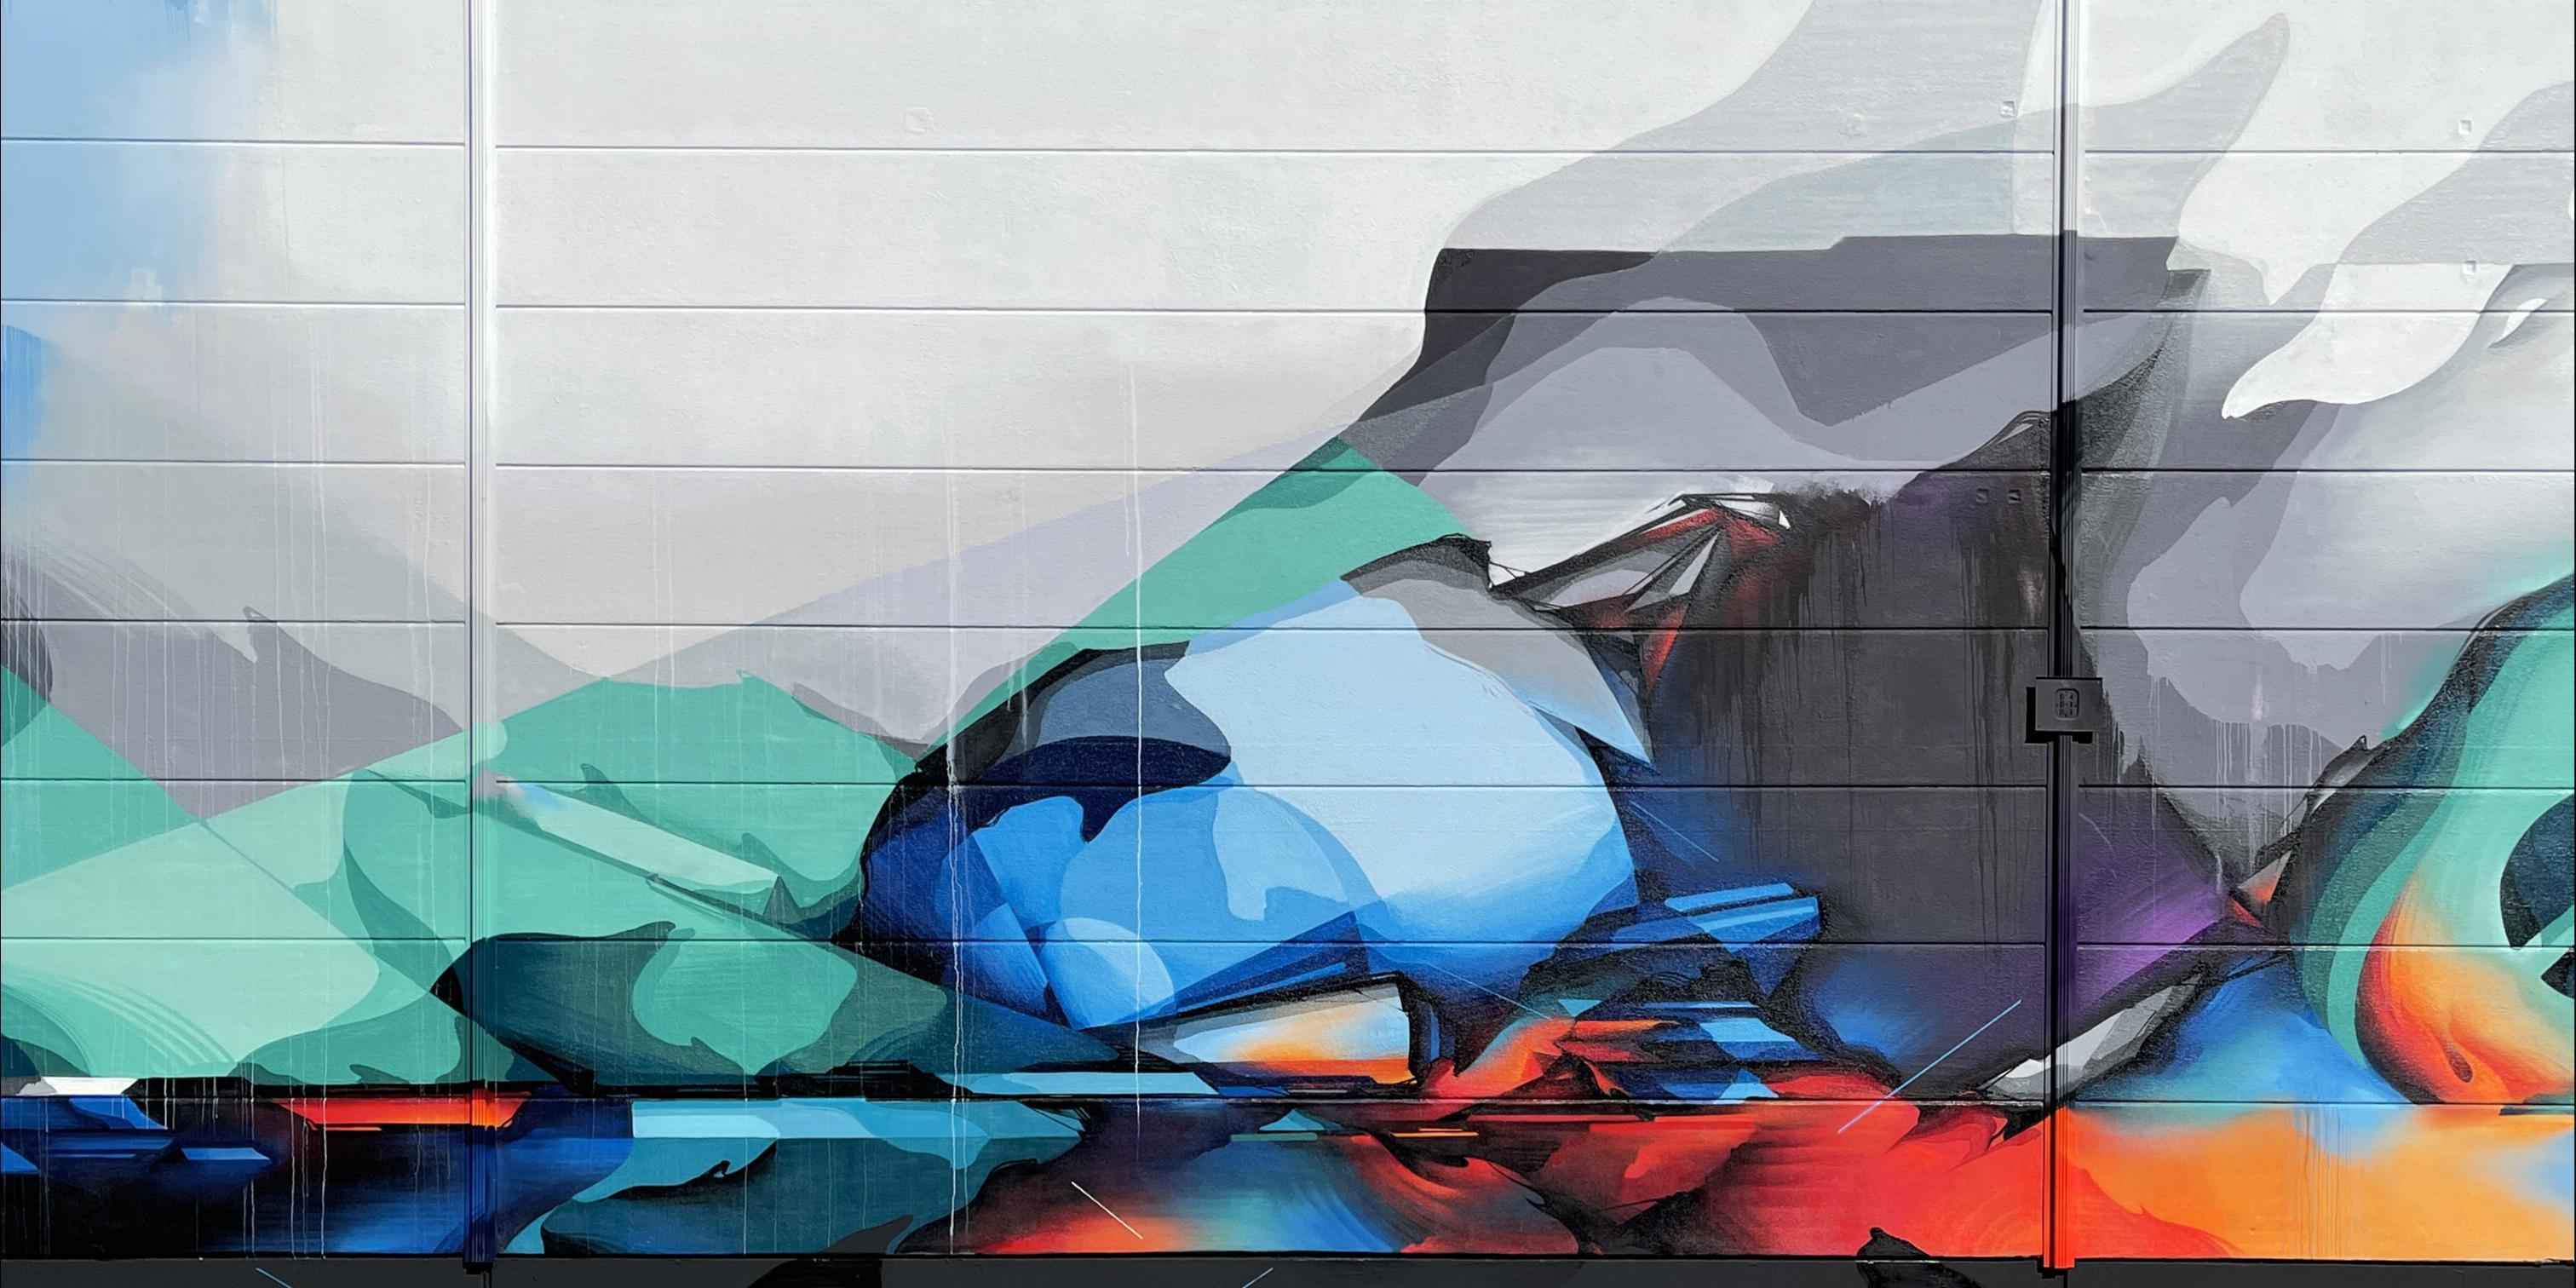 A work by Does - Helsingborg, Sweden_thumb